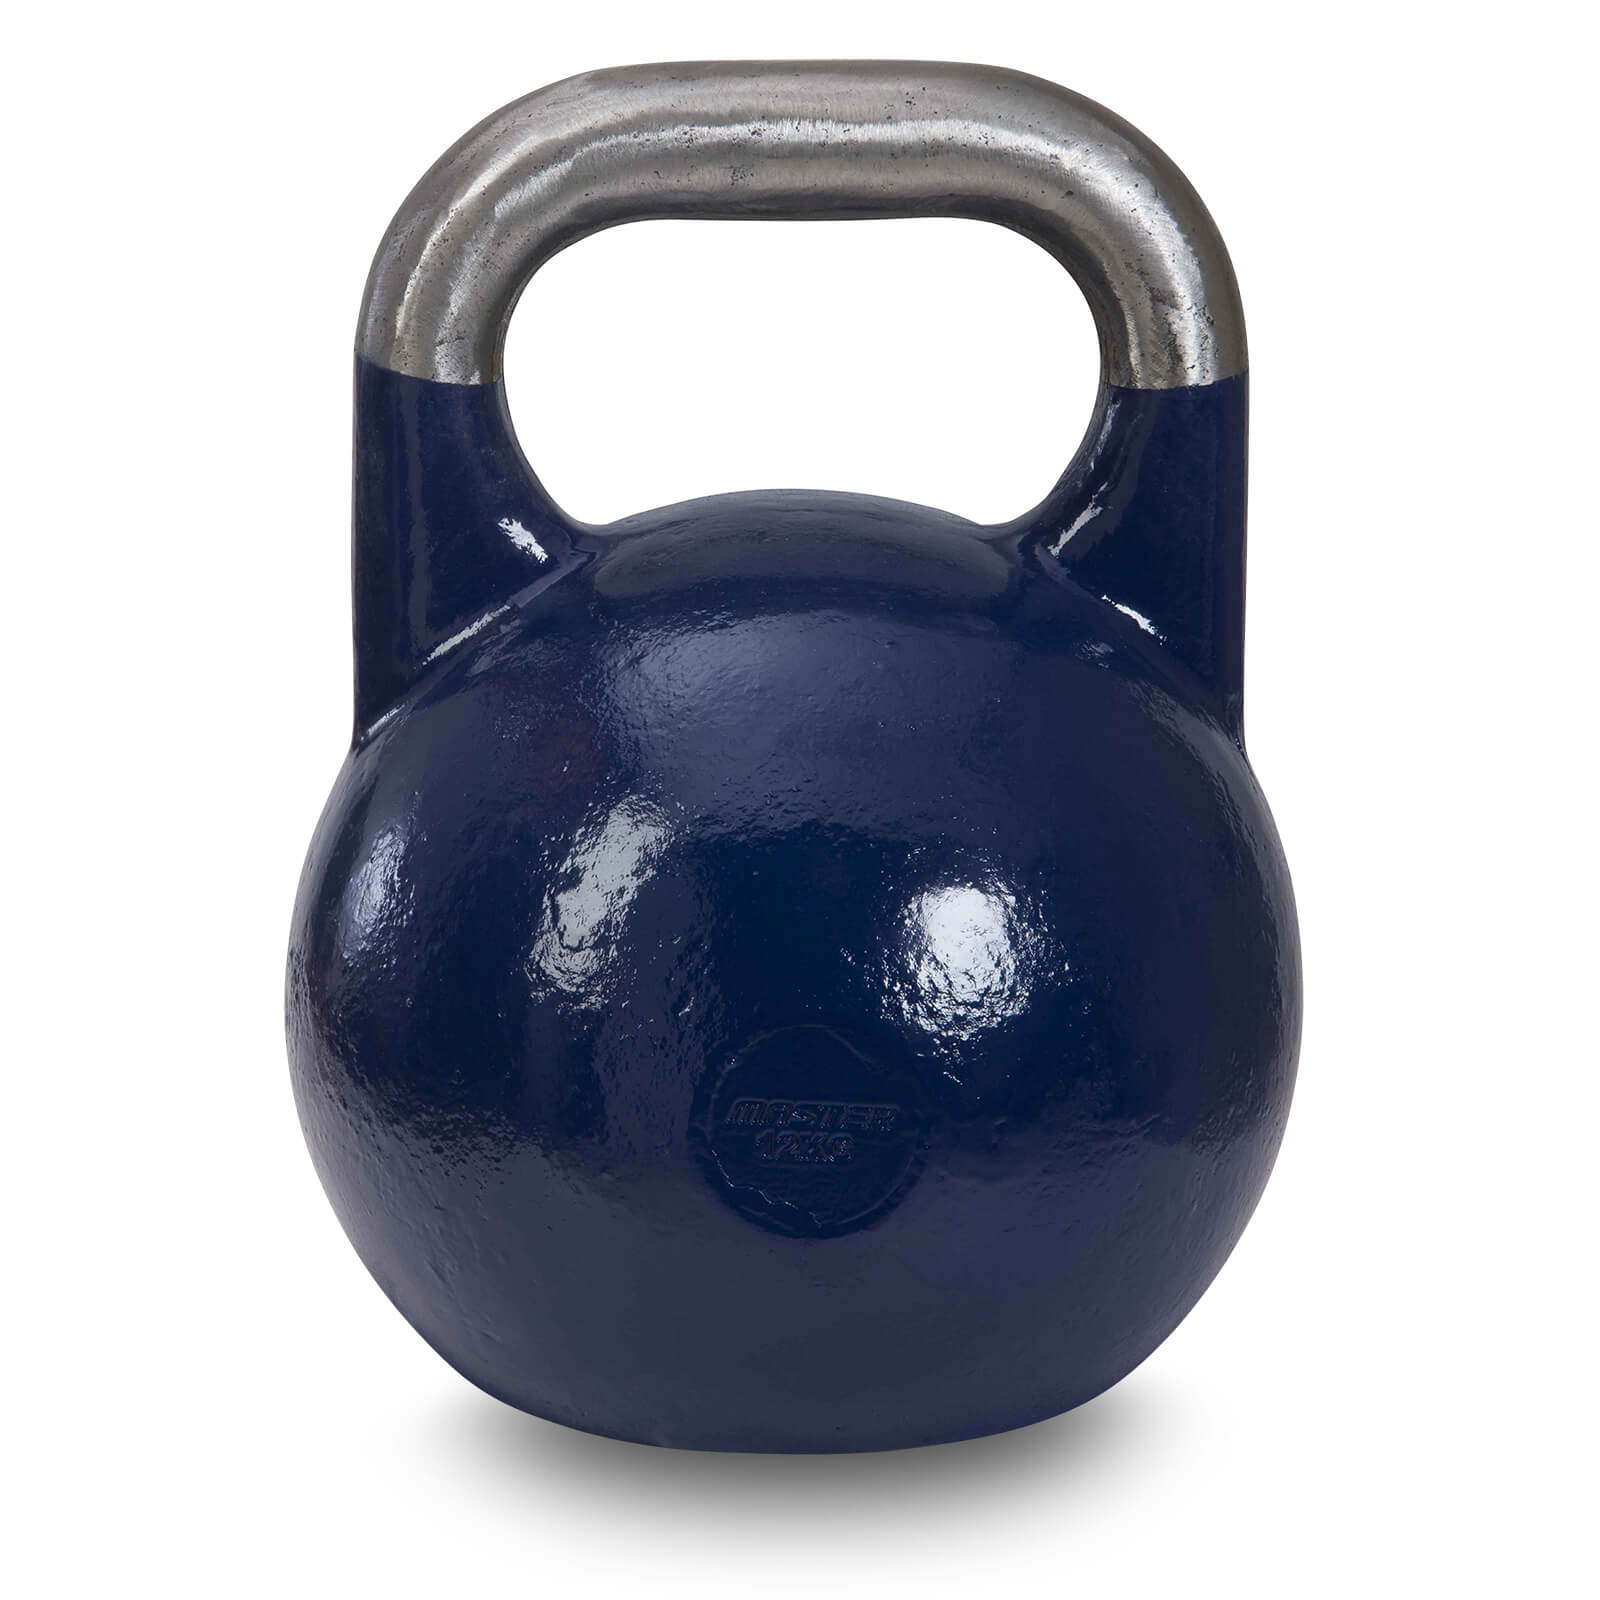 Competition kettlebell, 12 kg